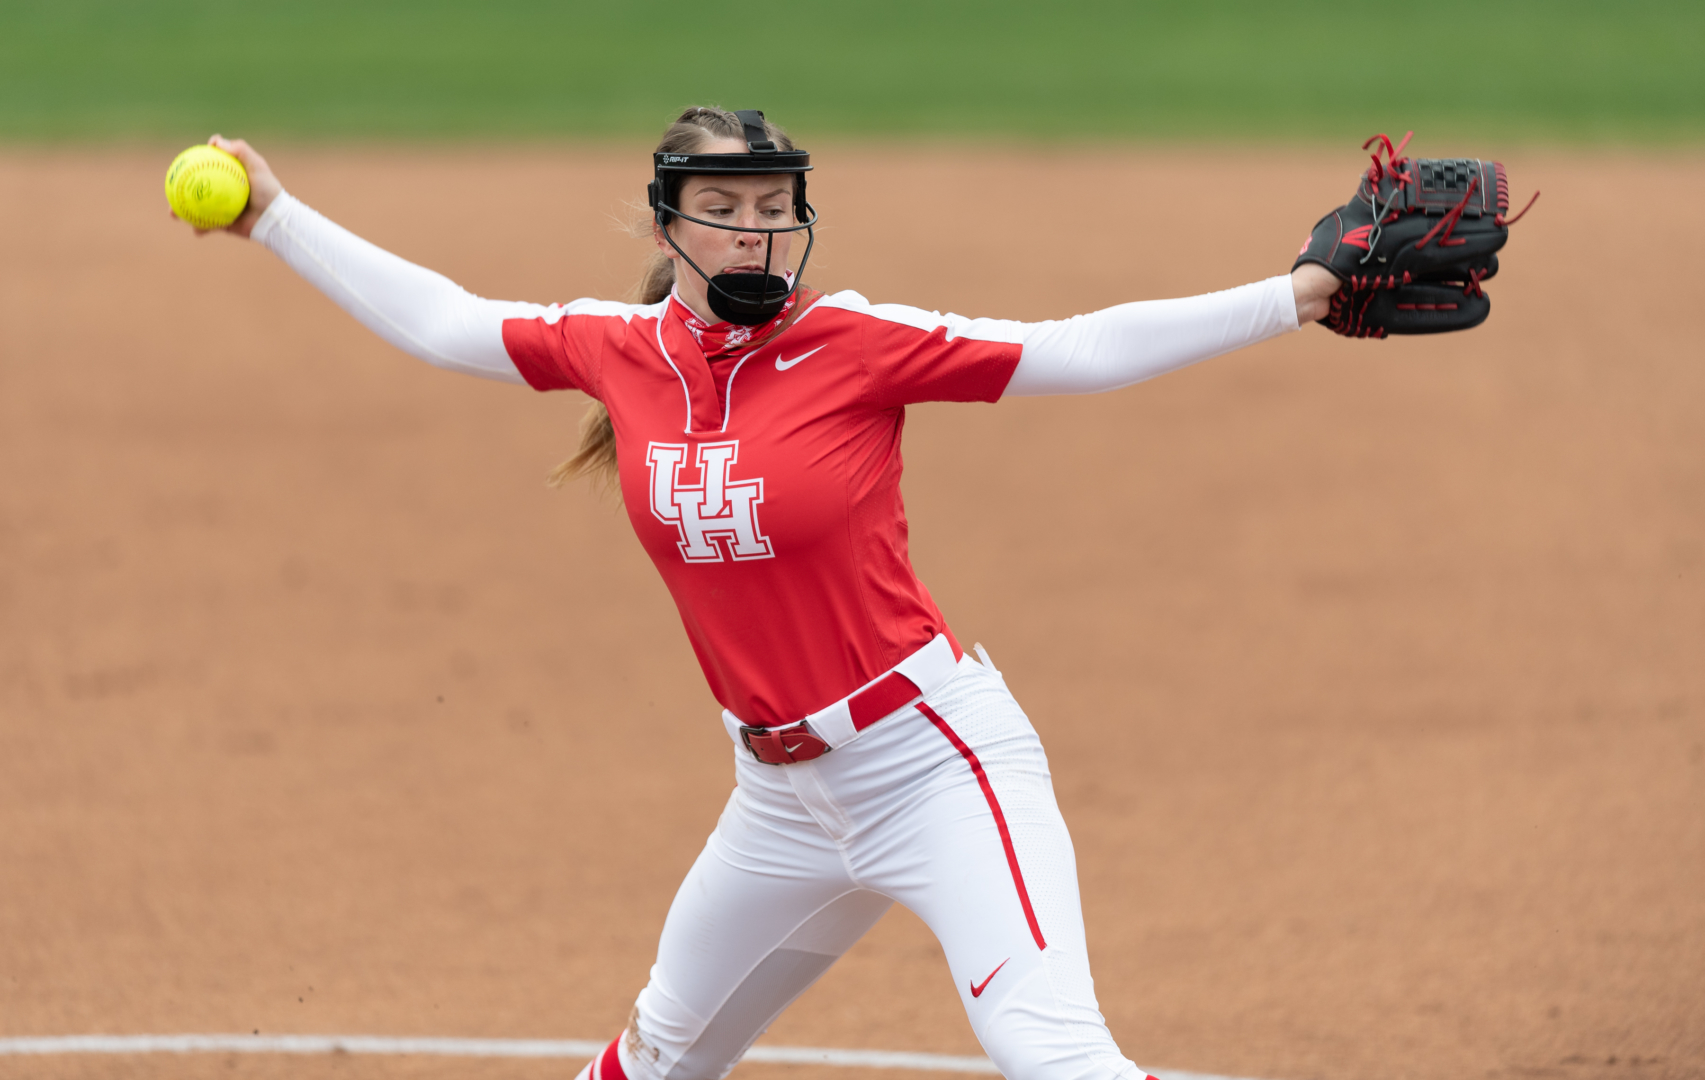 Junior pitcher Rachel Hertenberger winds up in the circle during UH softball's 2021 season opener against Lamar. | Courtesy of UH athletics